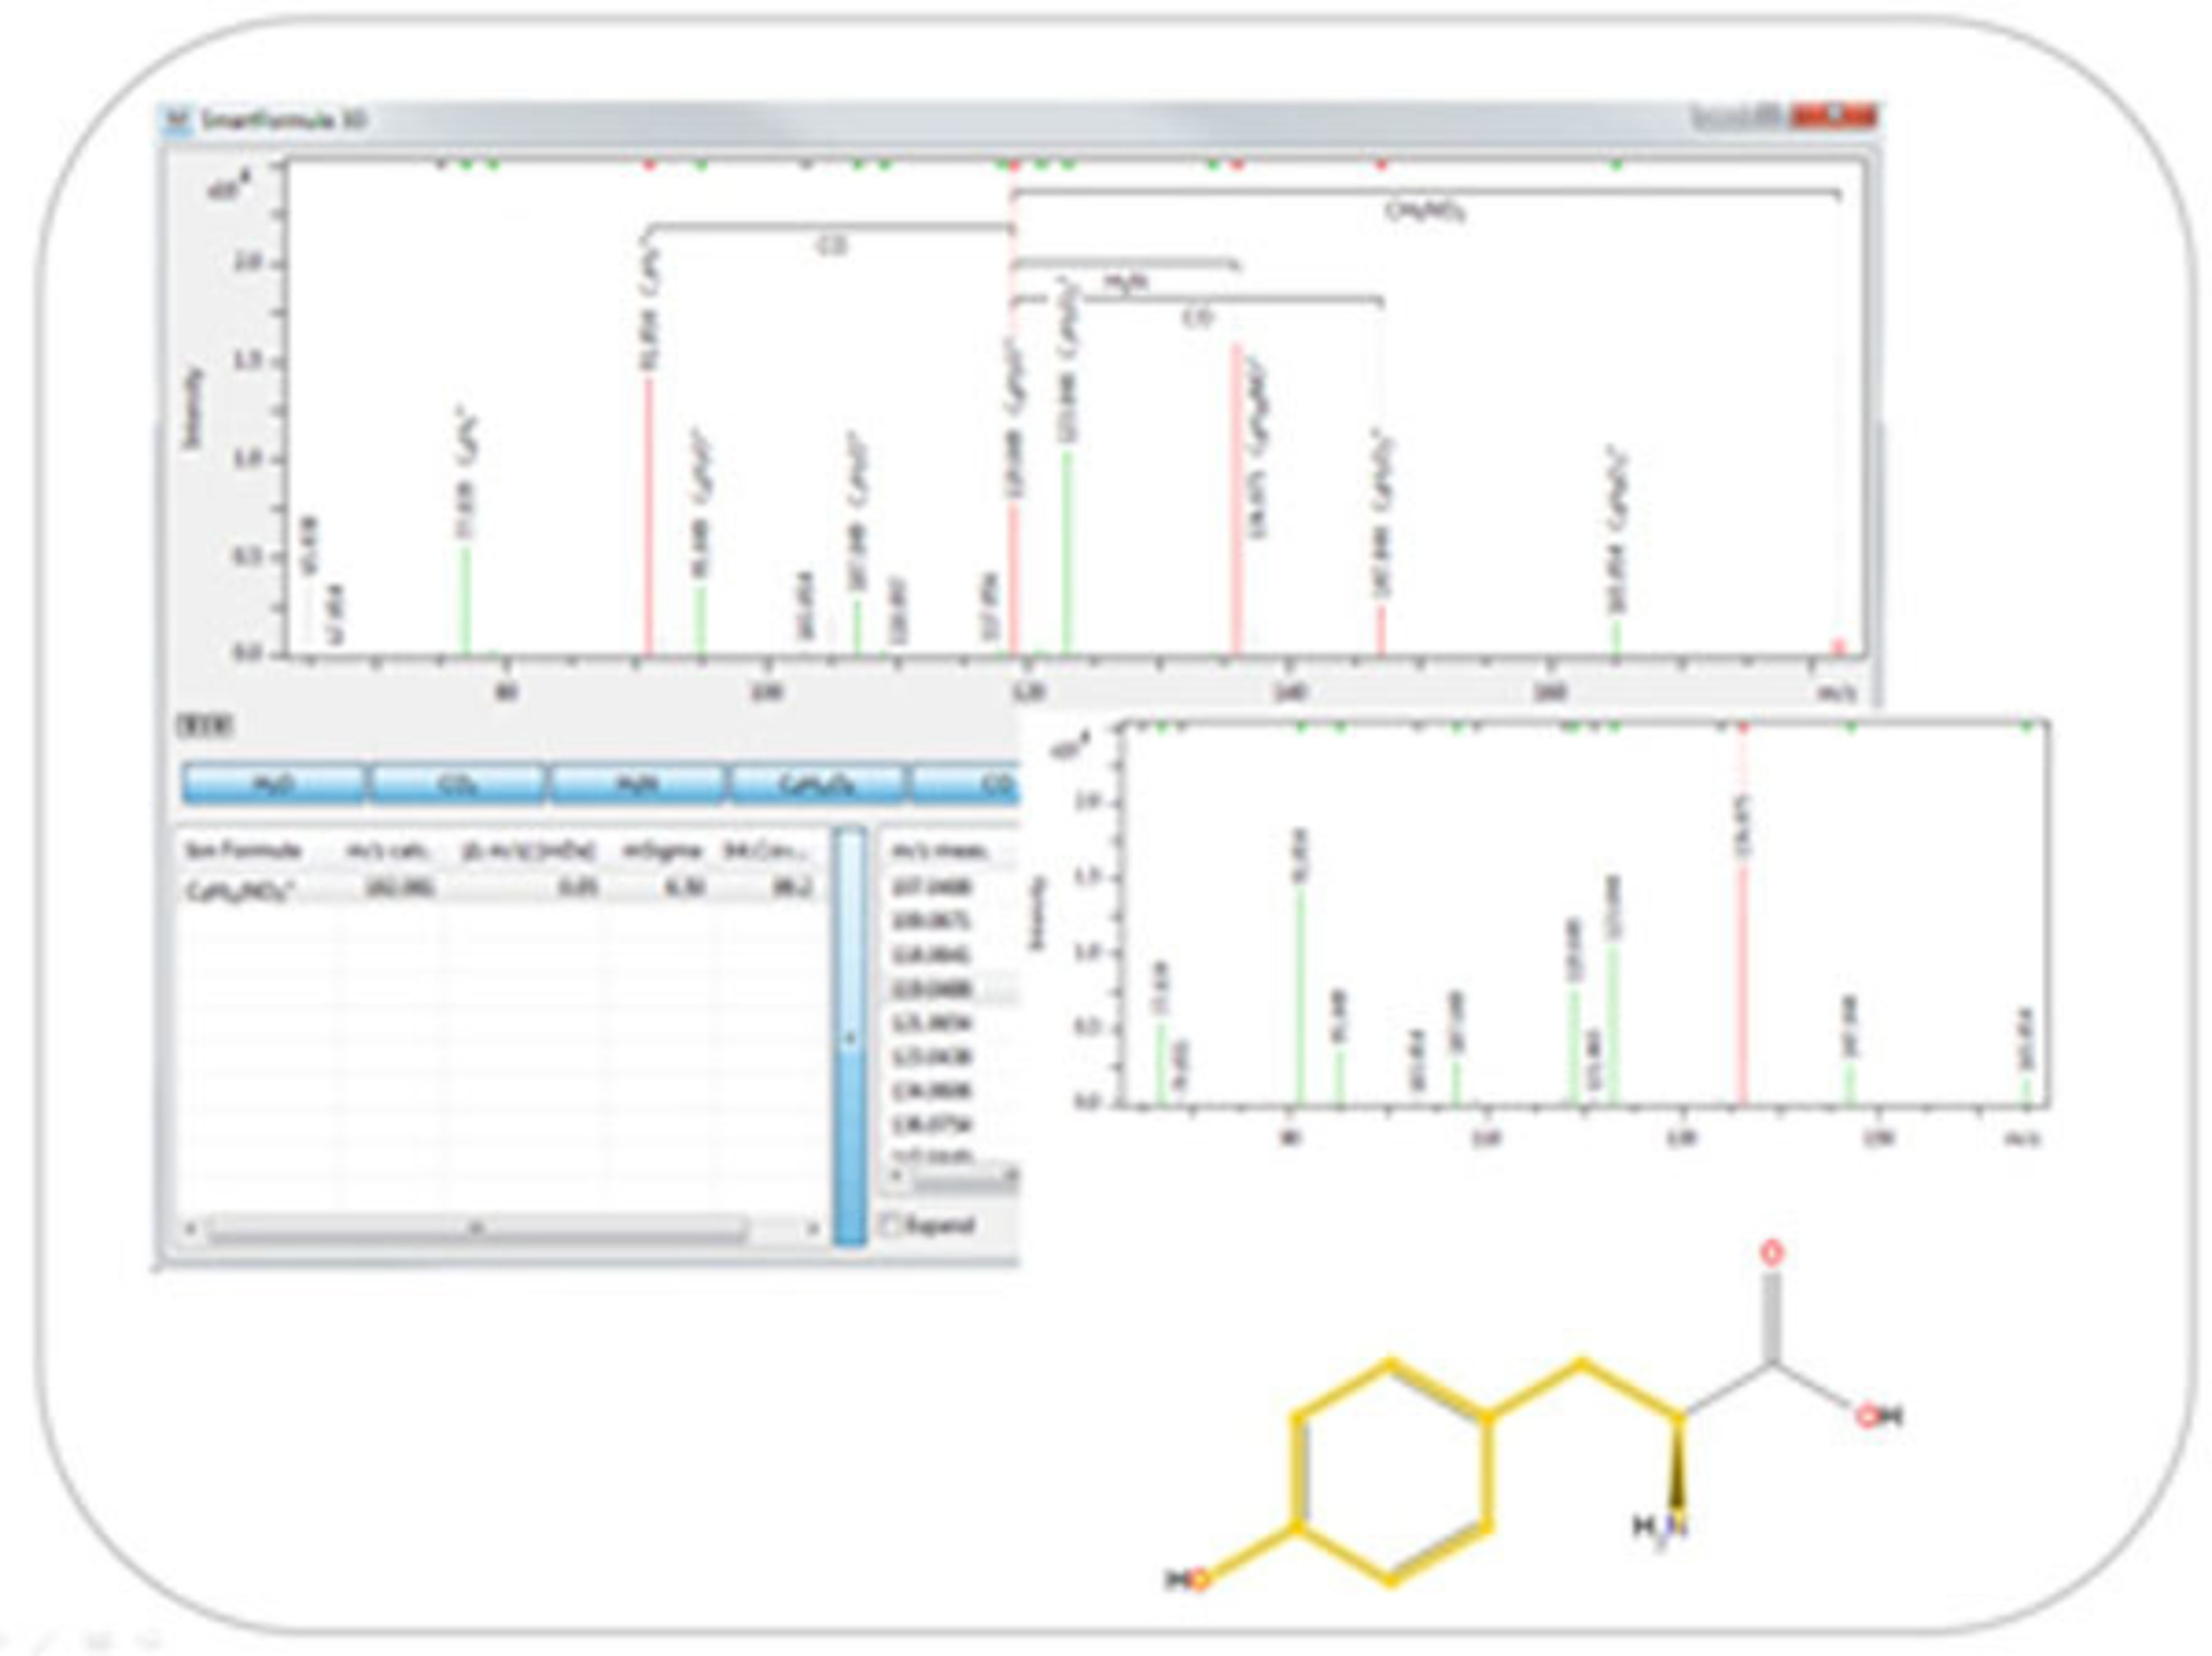 Figure 2: Seamless annotation of unknown compounds - MetaboScape 2.0 simplifies identification of unknowns. The fully integrated, proprietary and unique SmartFormula(TM) 3D isotopic ratio routine for precursor and product ions automatically and confidently generates precise molecular formula.  CompoundCrawler(TM) provides hits for possible structures by accessing online databases. Subsequent in silico fragmentation of structure candidates provides the compound with the best score by matching measured...